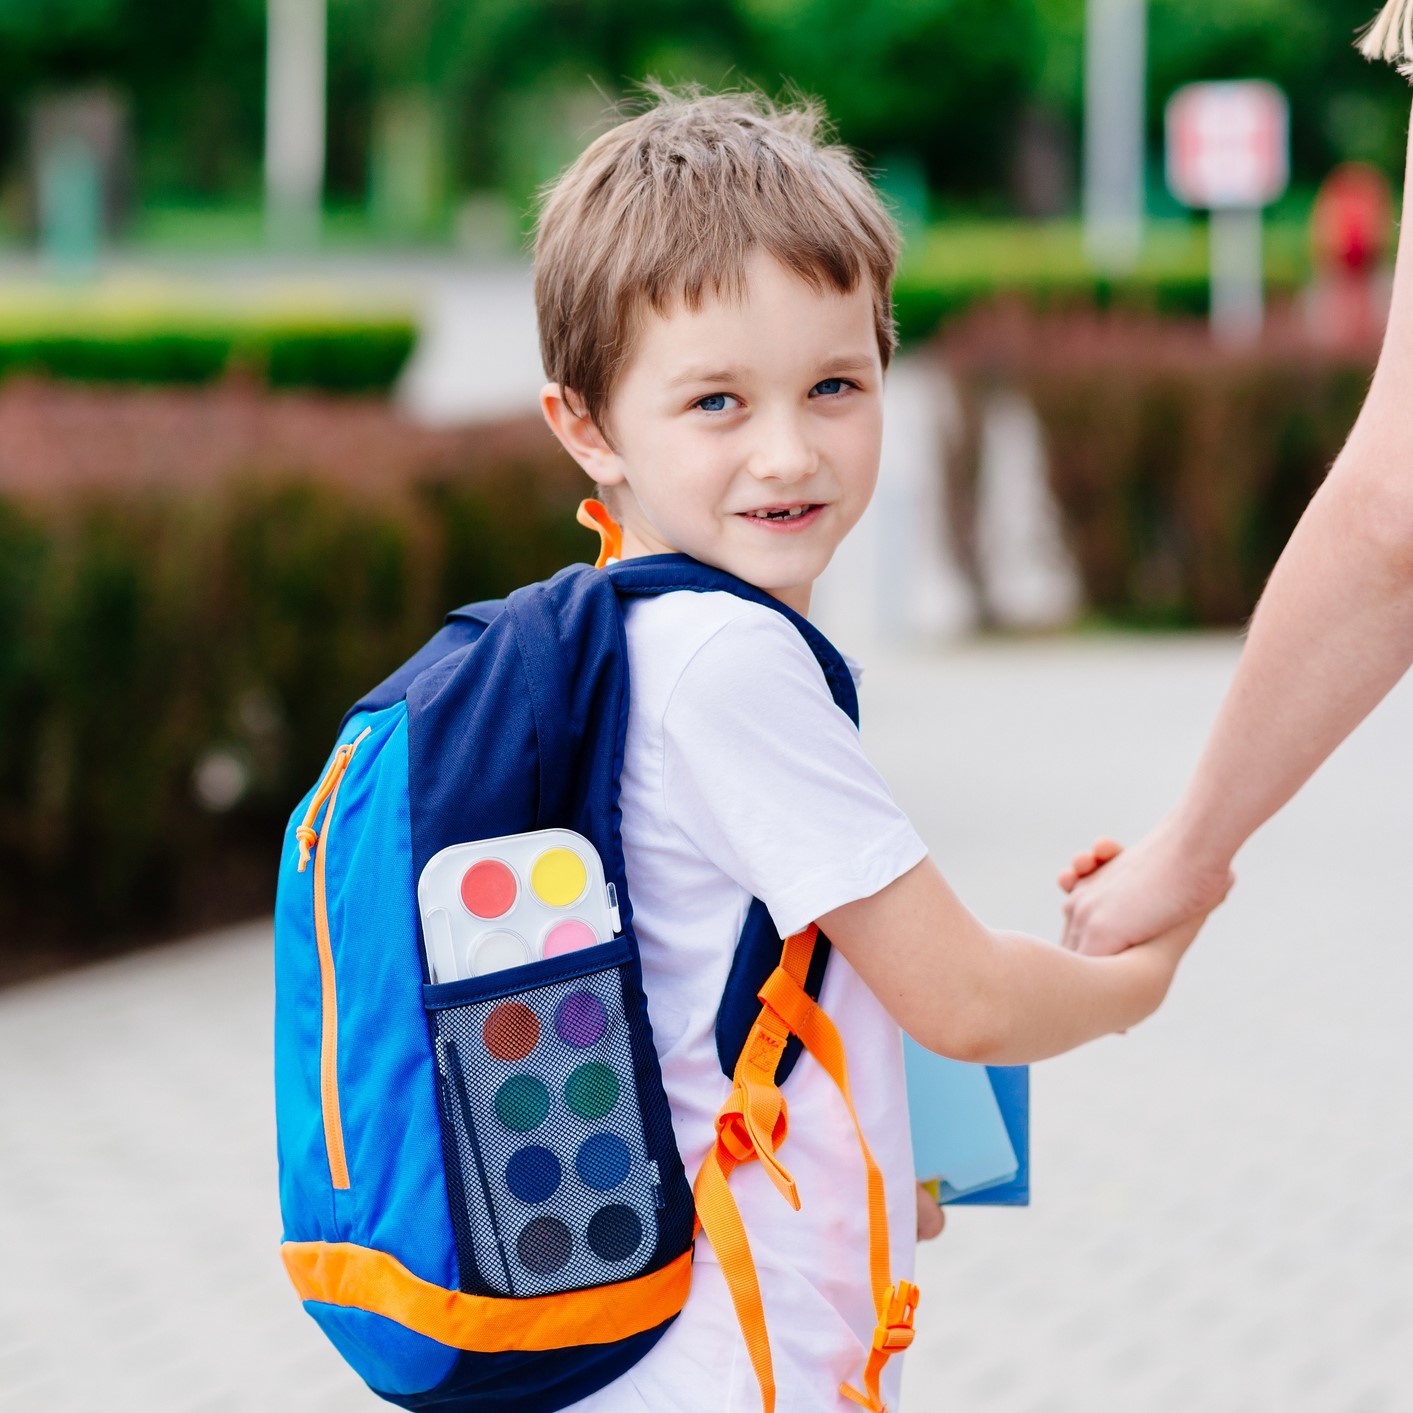 7-year-old boy with a backpack, holding his mother's hand in front of his school